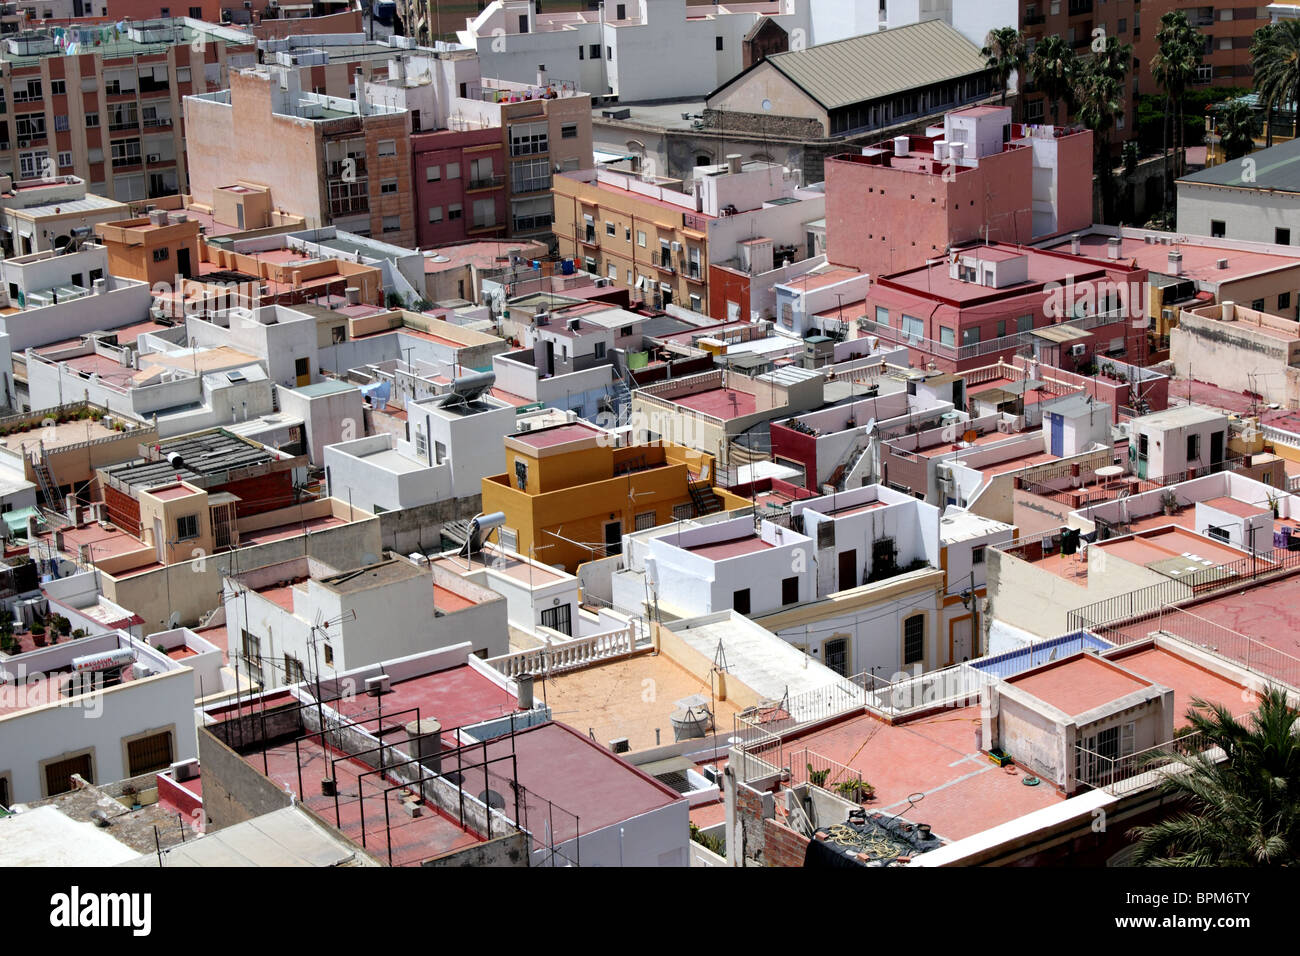 View of rooftops and houses seen from an elevated position in la Alcazaba, Almeria, Andalusia Spain Stock Photo